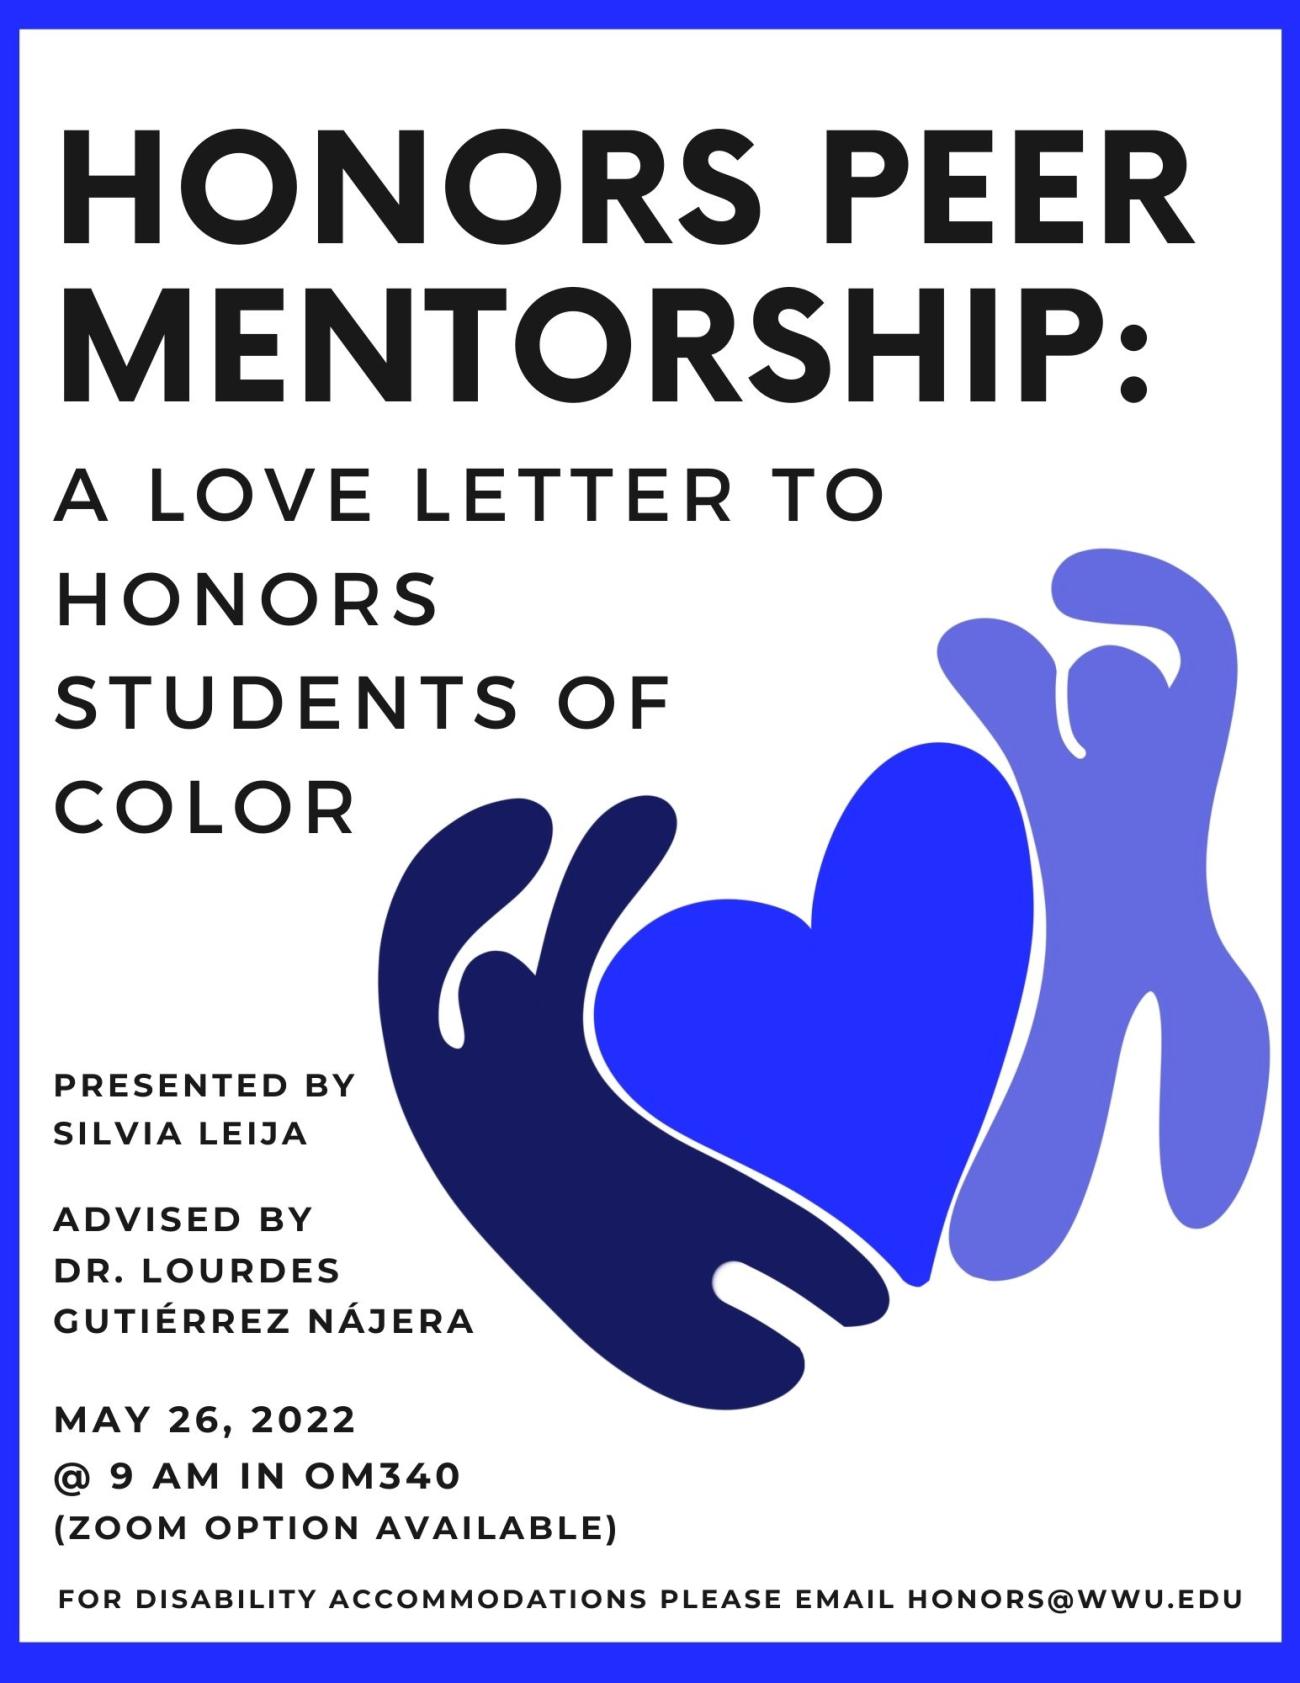 White background with blue border. Illustration of two blob people surrounding a heart in different tones of blue. Text top to bottom reads: "Honors Peer Mentorship: A Love Letter to Honors Students of Color Presented by Silvia Leija Advised By Dr. Lourdes Gutiérrez Nájera May 26, 2022 @ 9 am OM340. (And on Zoom). For disability accommodations, please email honors@wwu.edu."